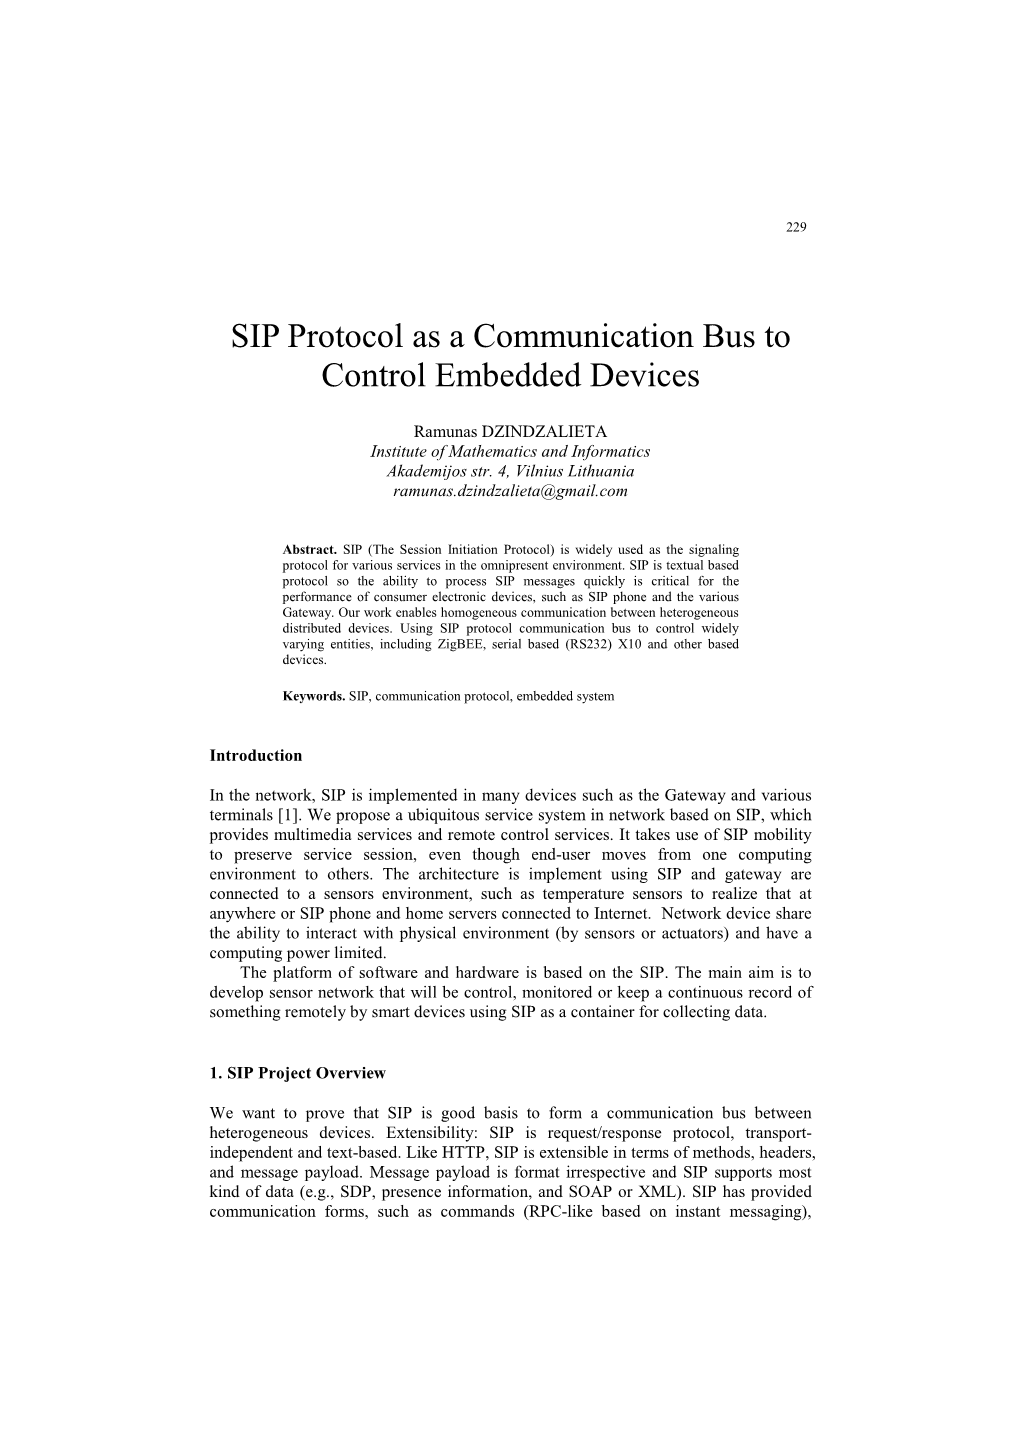 SIP Protocol As a Communication Bus to Control Embedded Devices